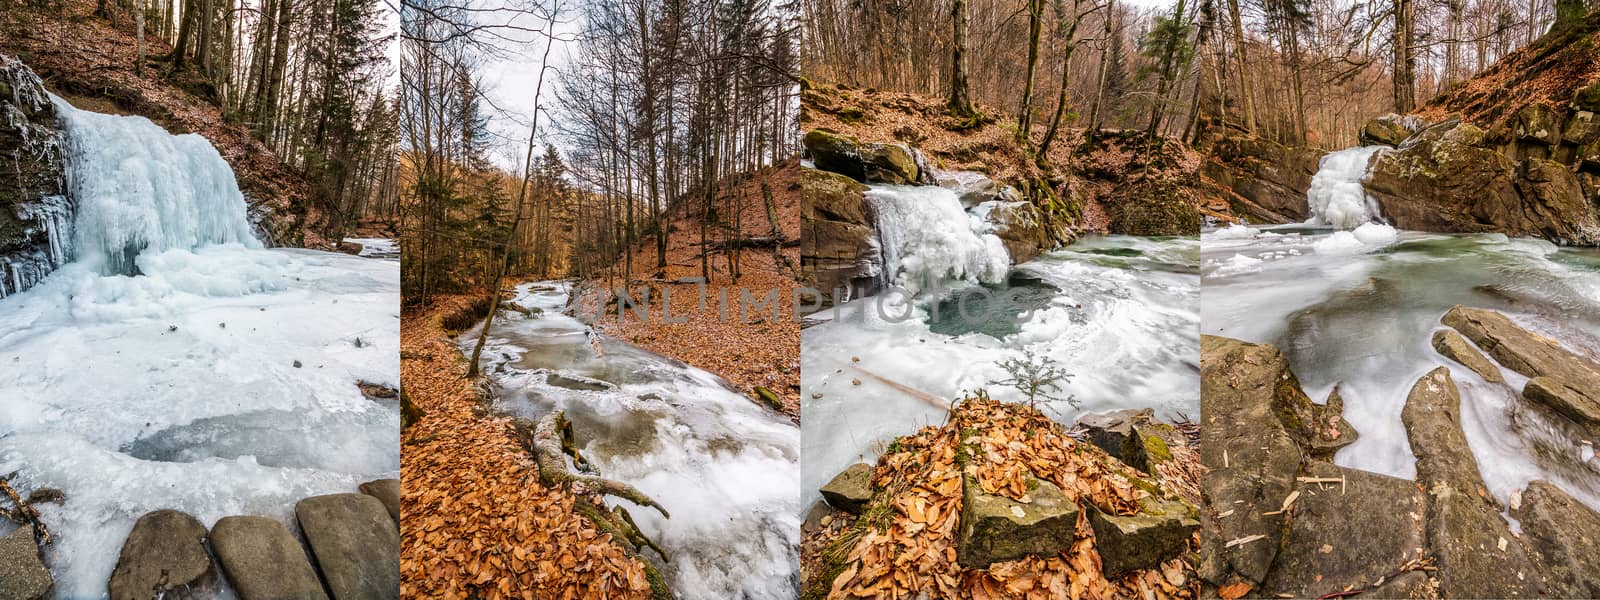 frozen river in forest image set by Pellinni